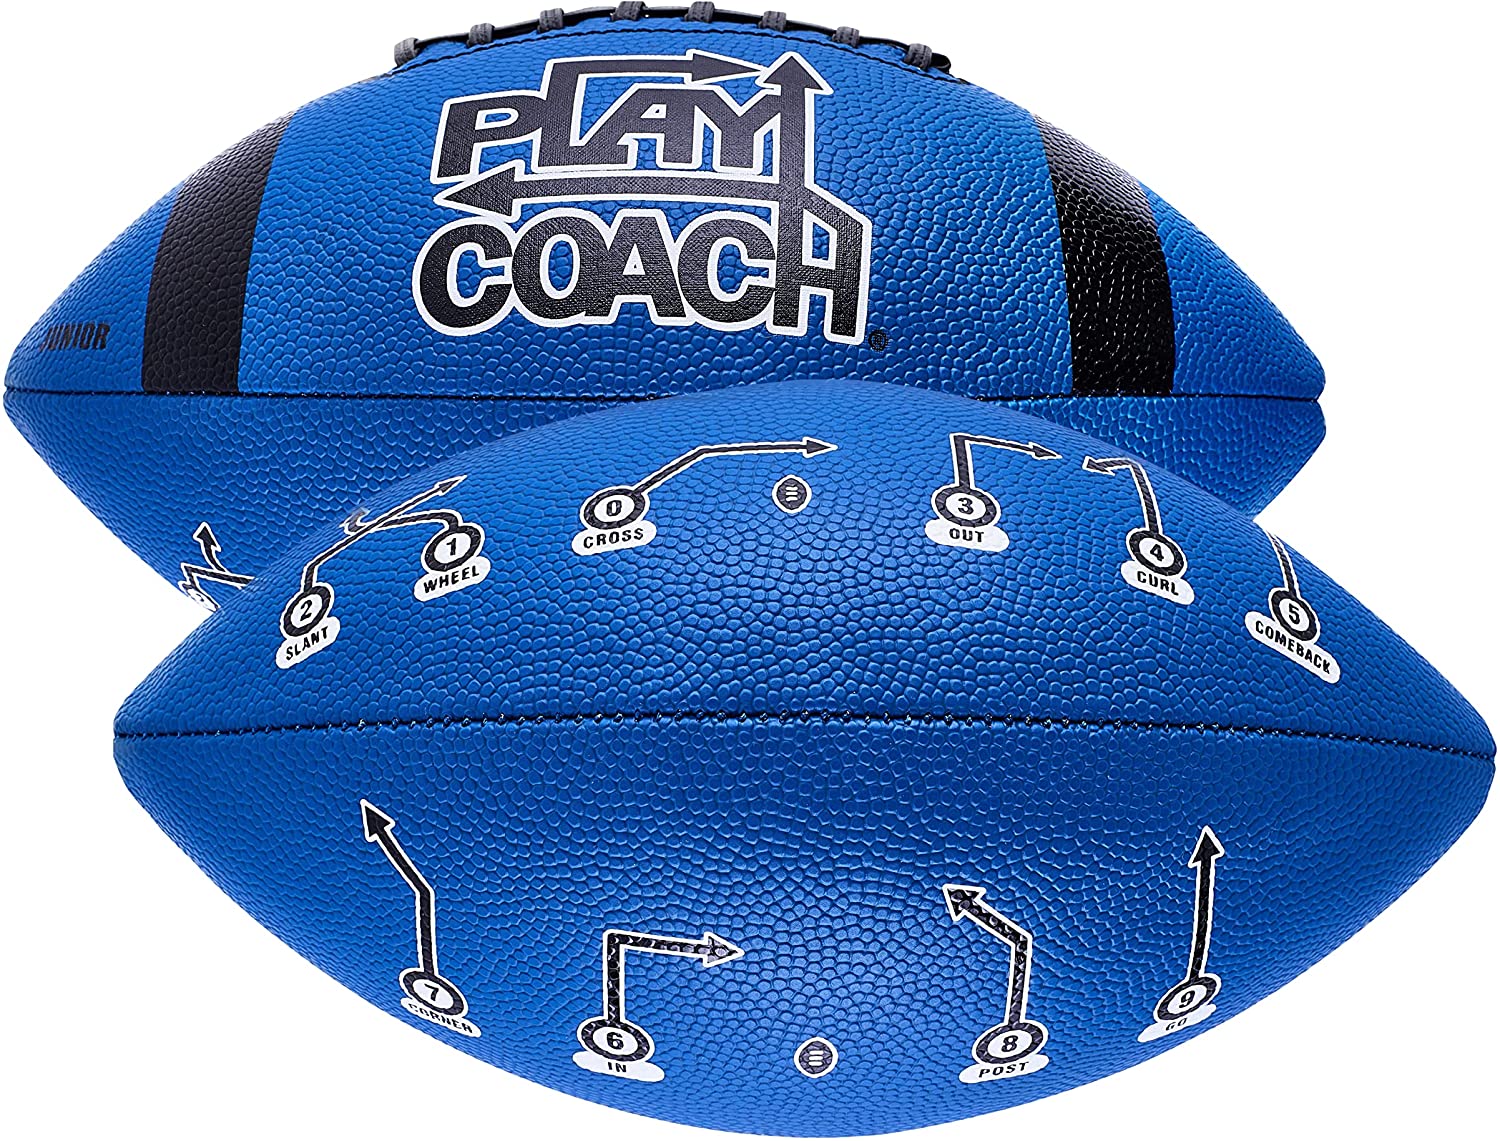 PlayCoach Educational Unique Grip Youth Size Football